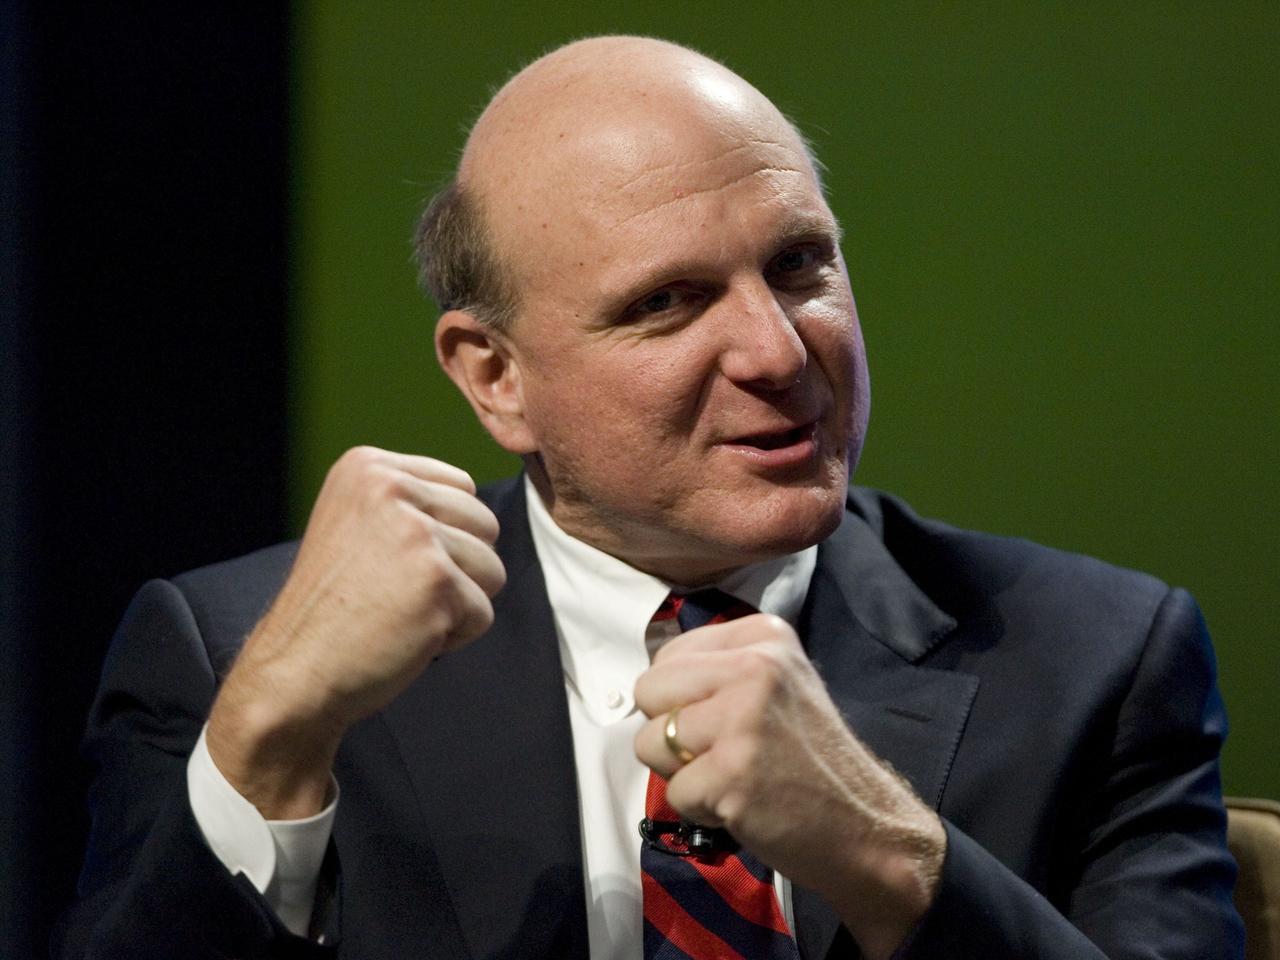 Steve Ballmer was CEO of Microsoft from 2000 to 2014. He is currently the owner of the NBA team 